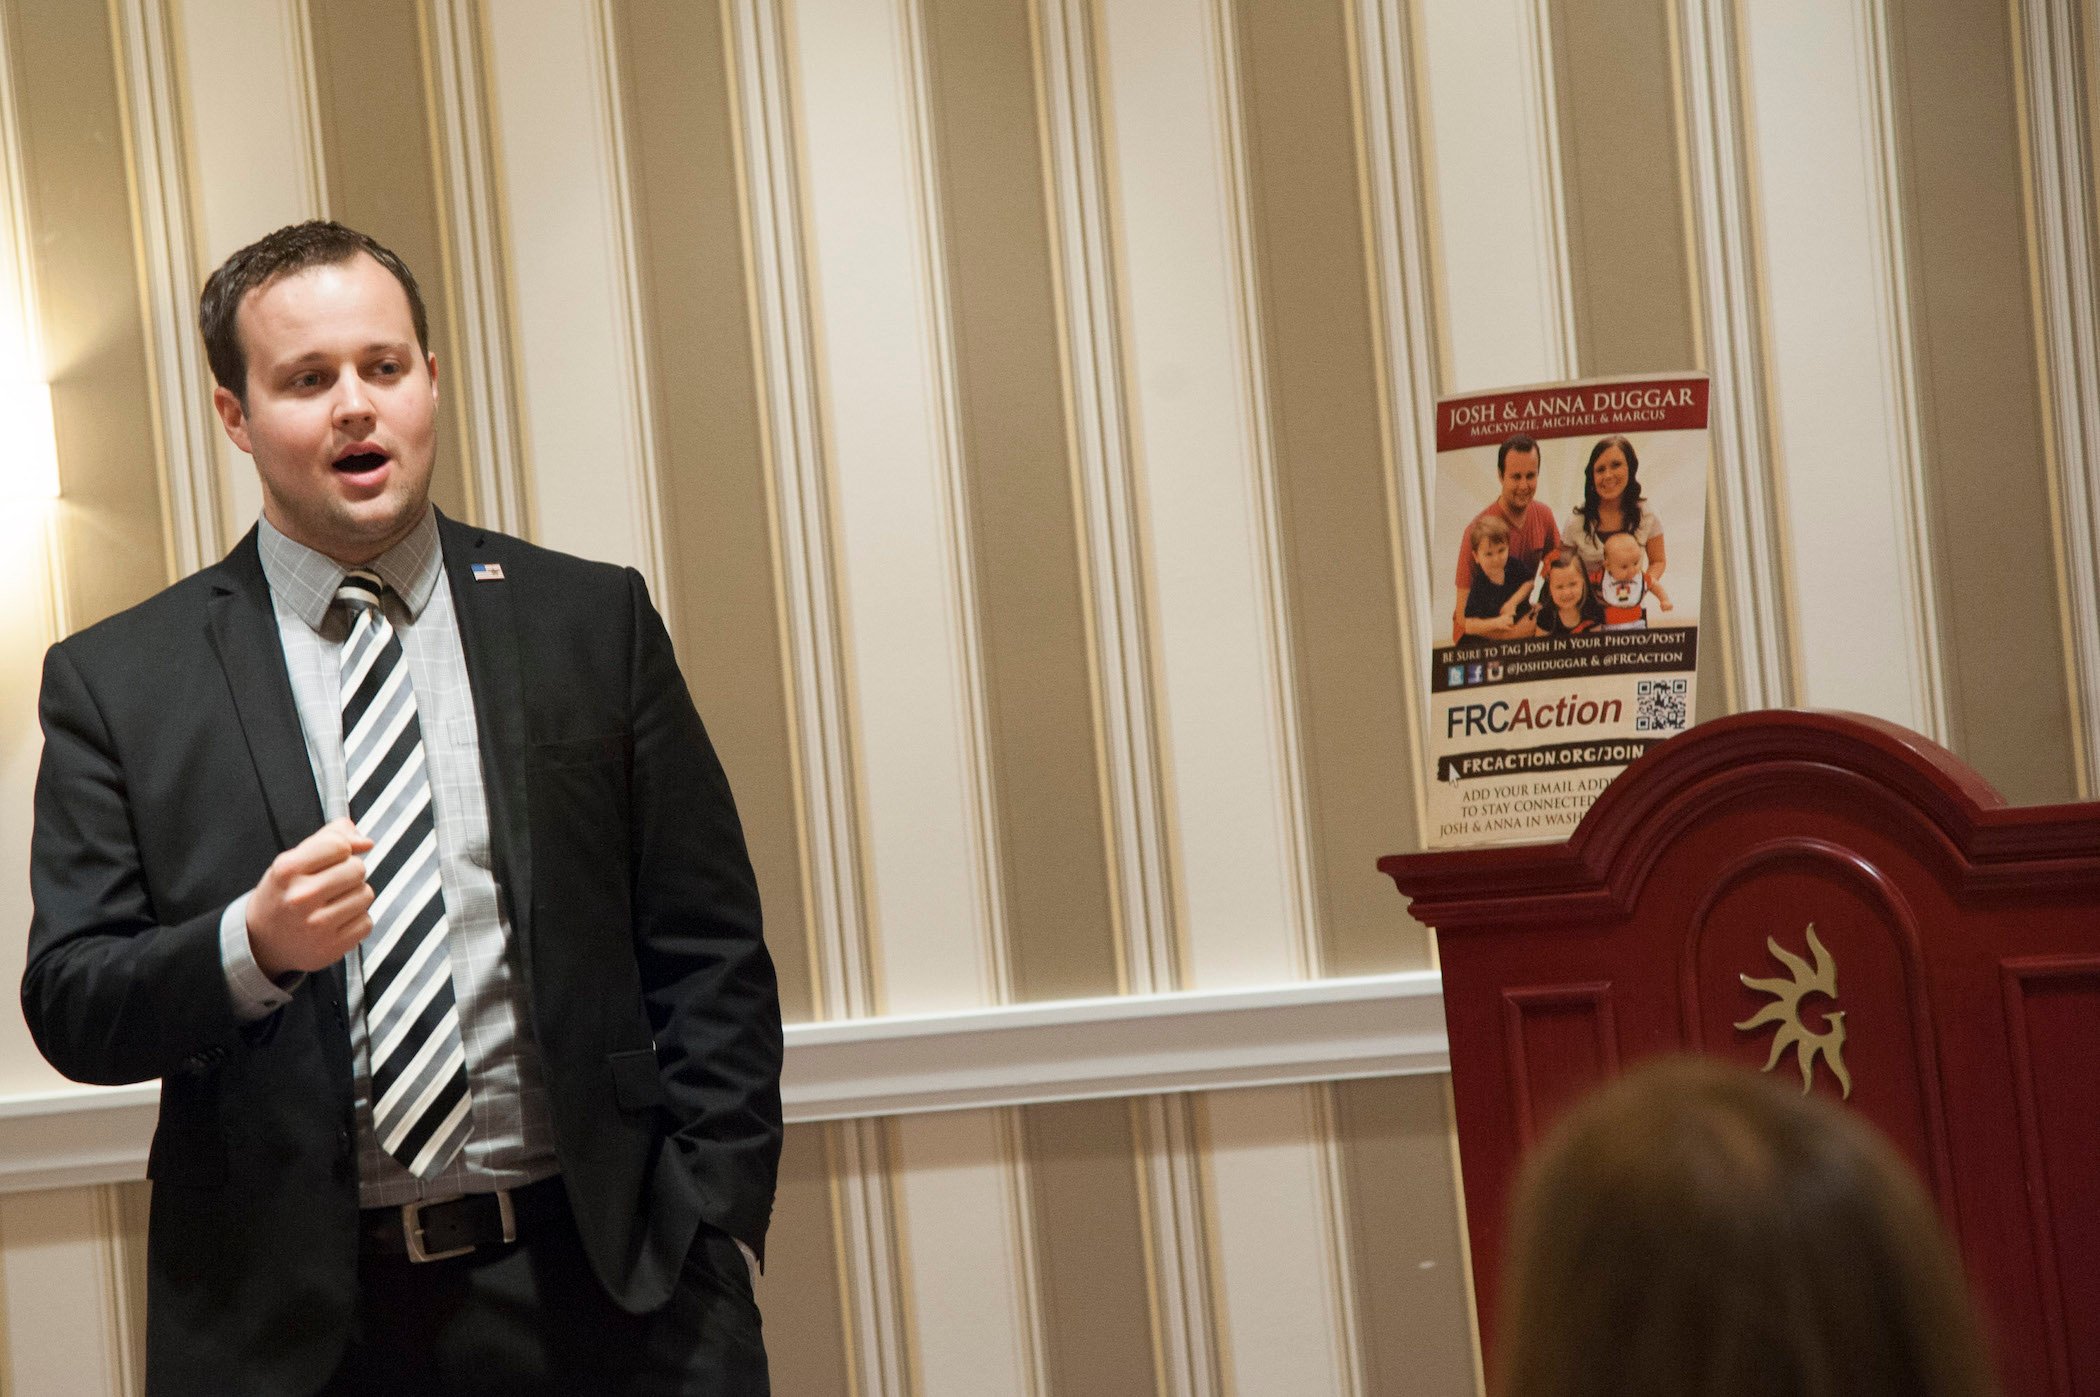 Josh Duggar of the Duggar family speaking at a conference. Josh Duggar news continues to dominate headlines following his arrest in April 2021